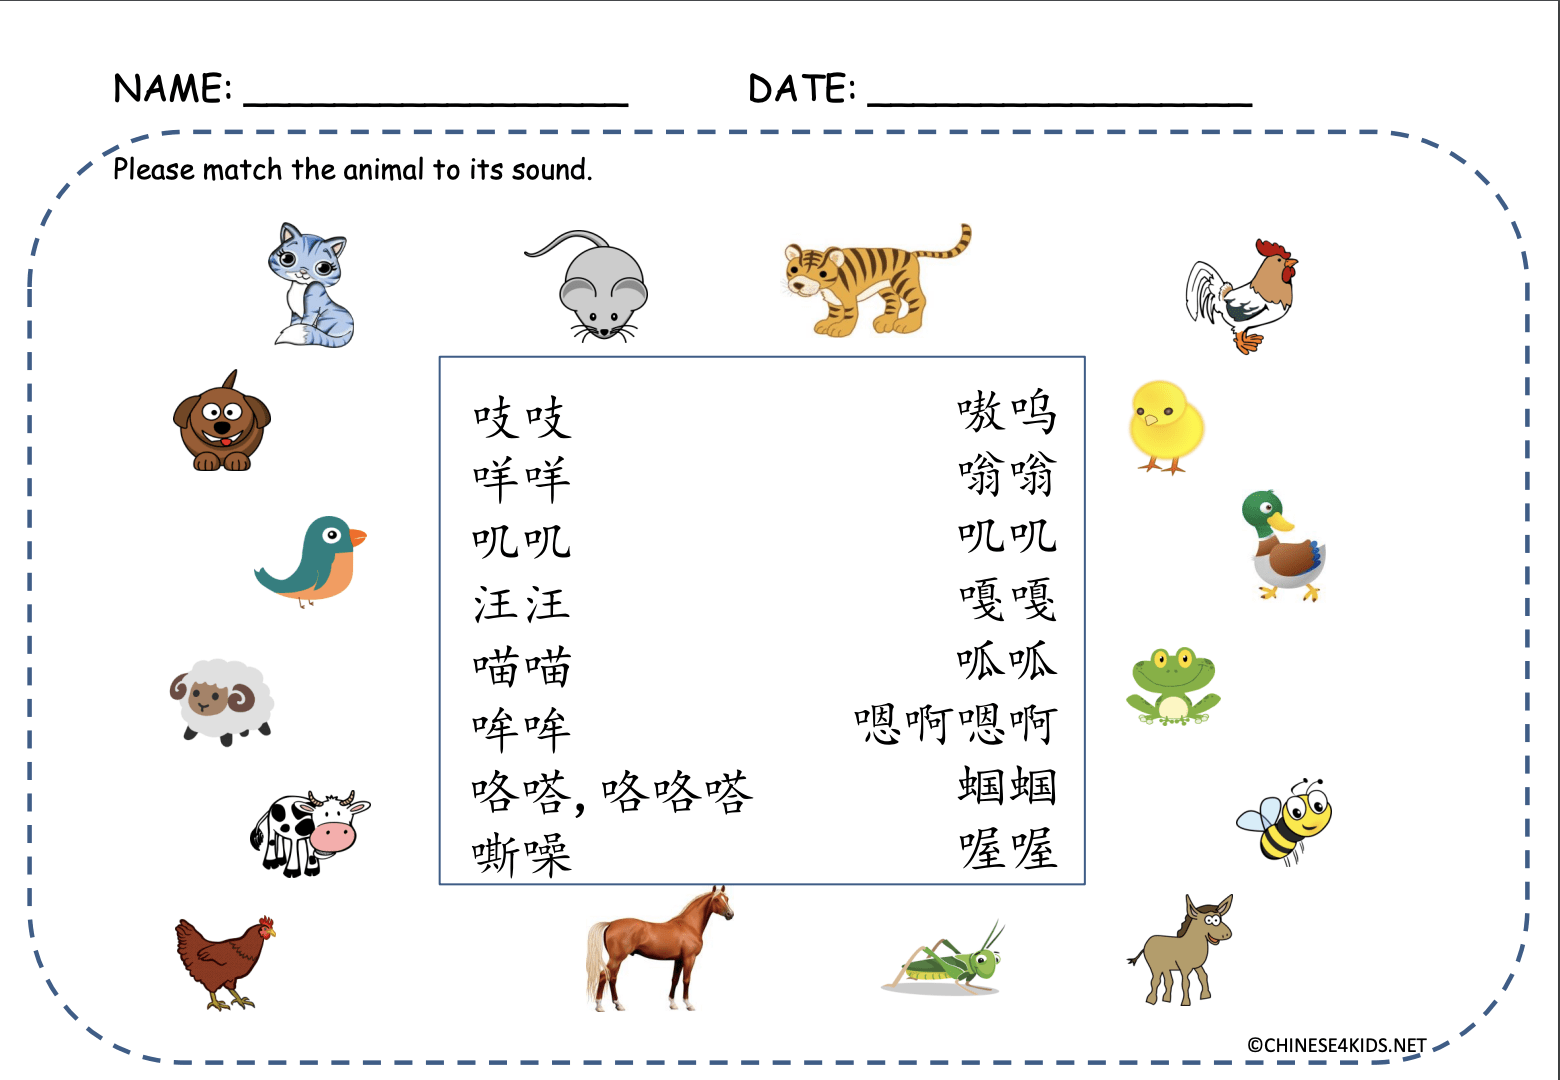 Chinese Animal Sounds Theme Learning Flash Cards and Worksheets